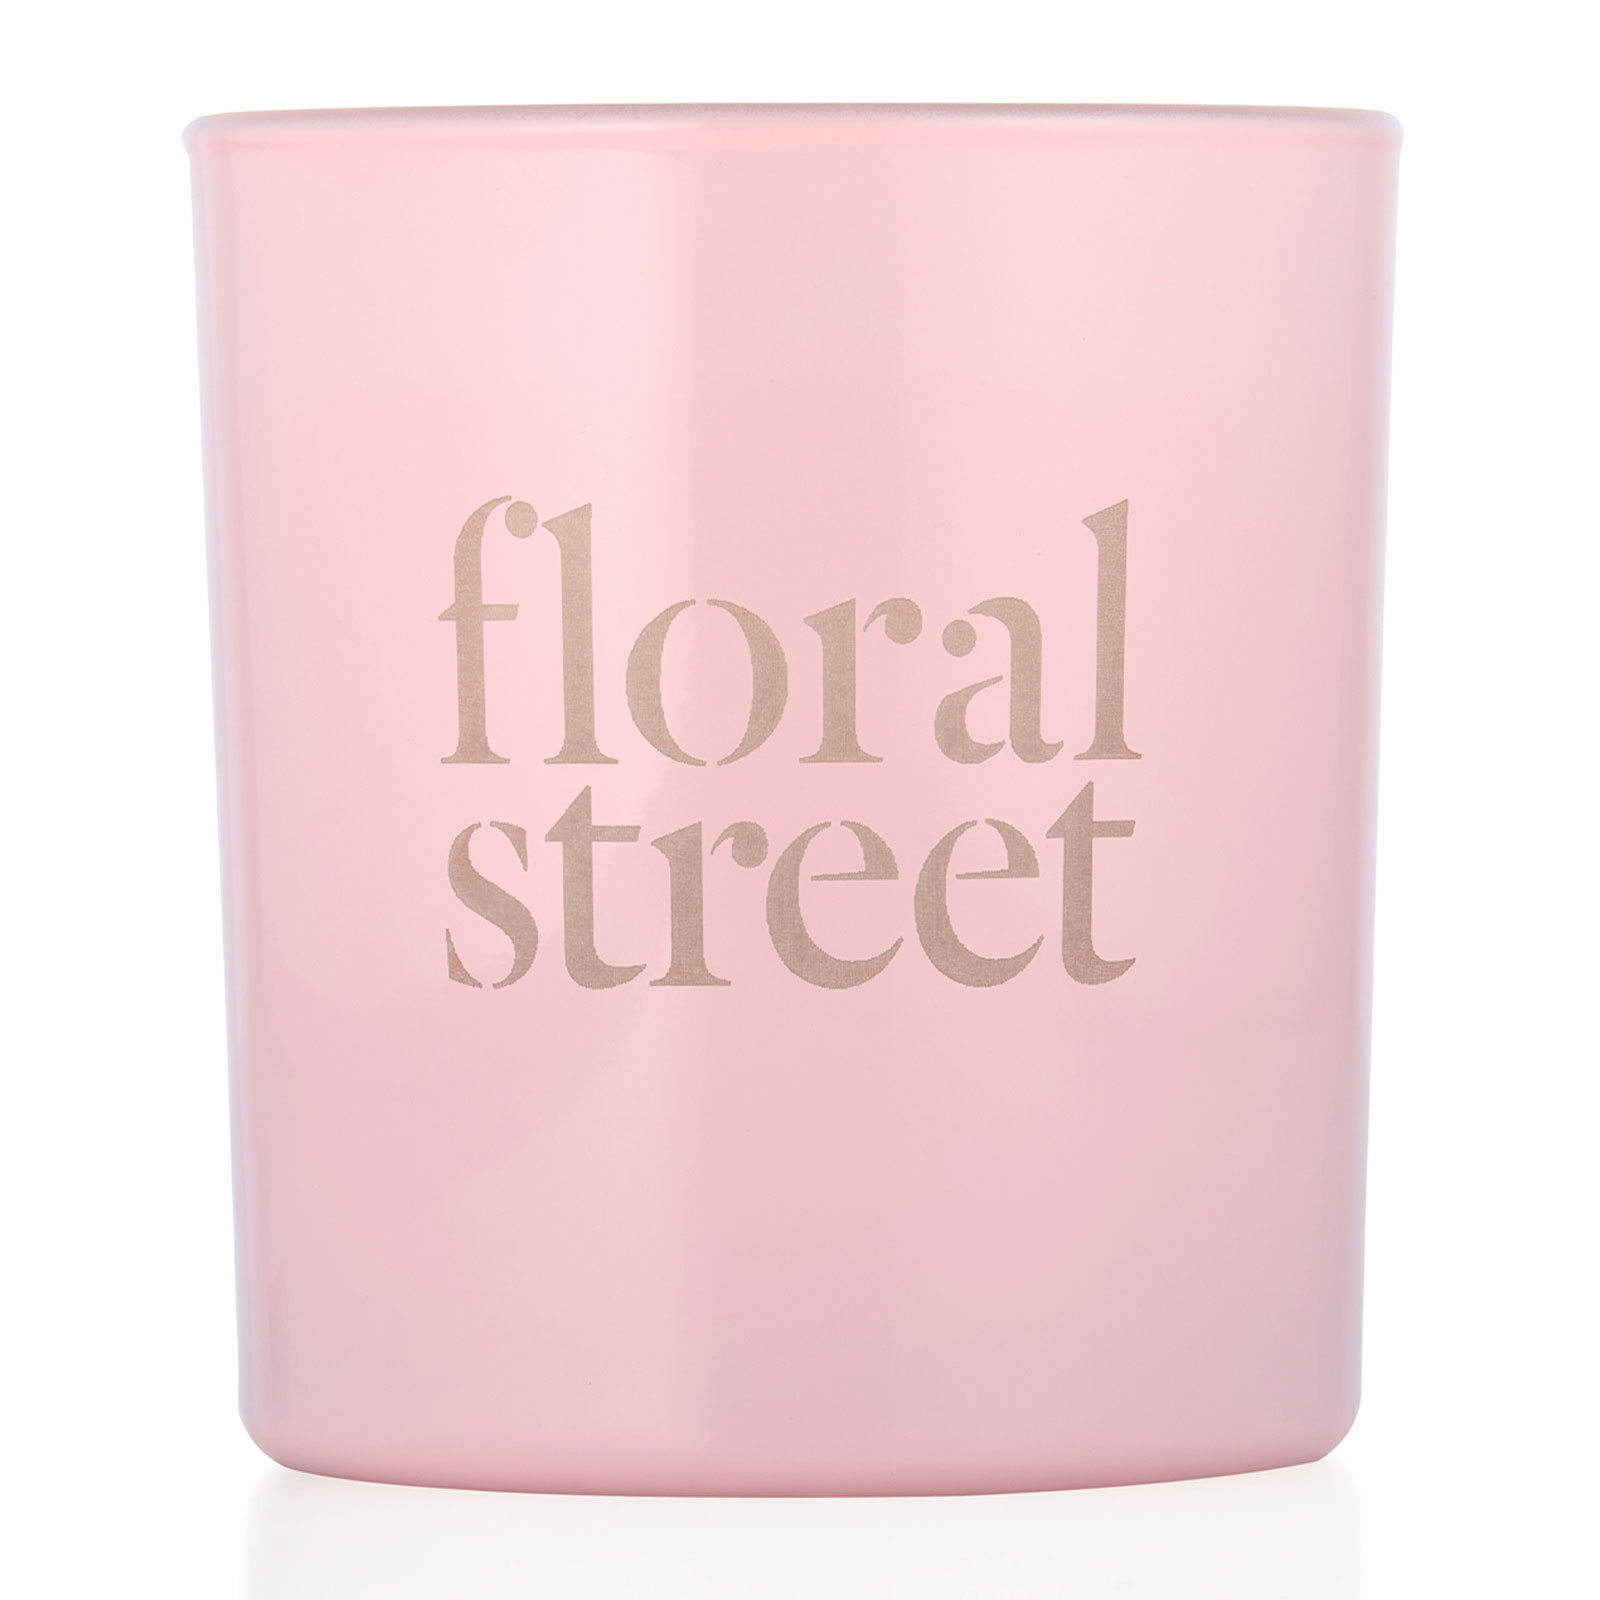 Floral Street Rose Provence Candle 200G